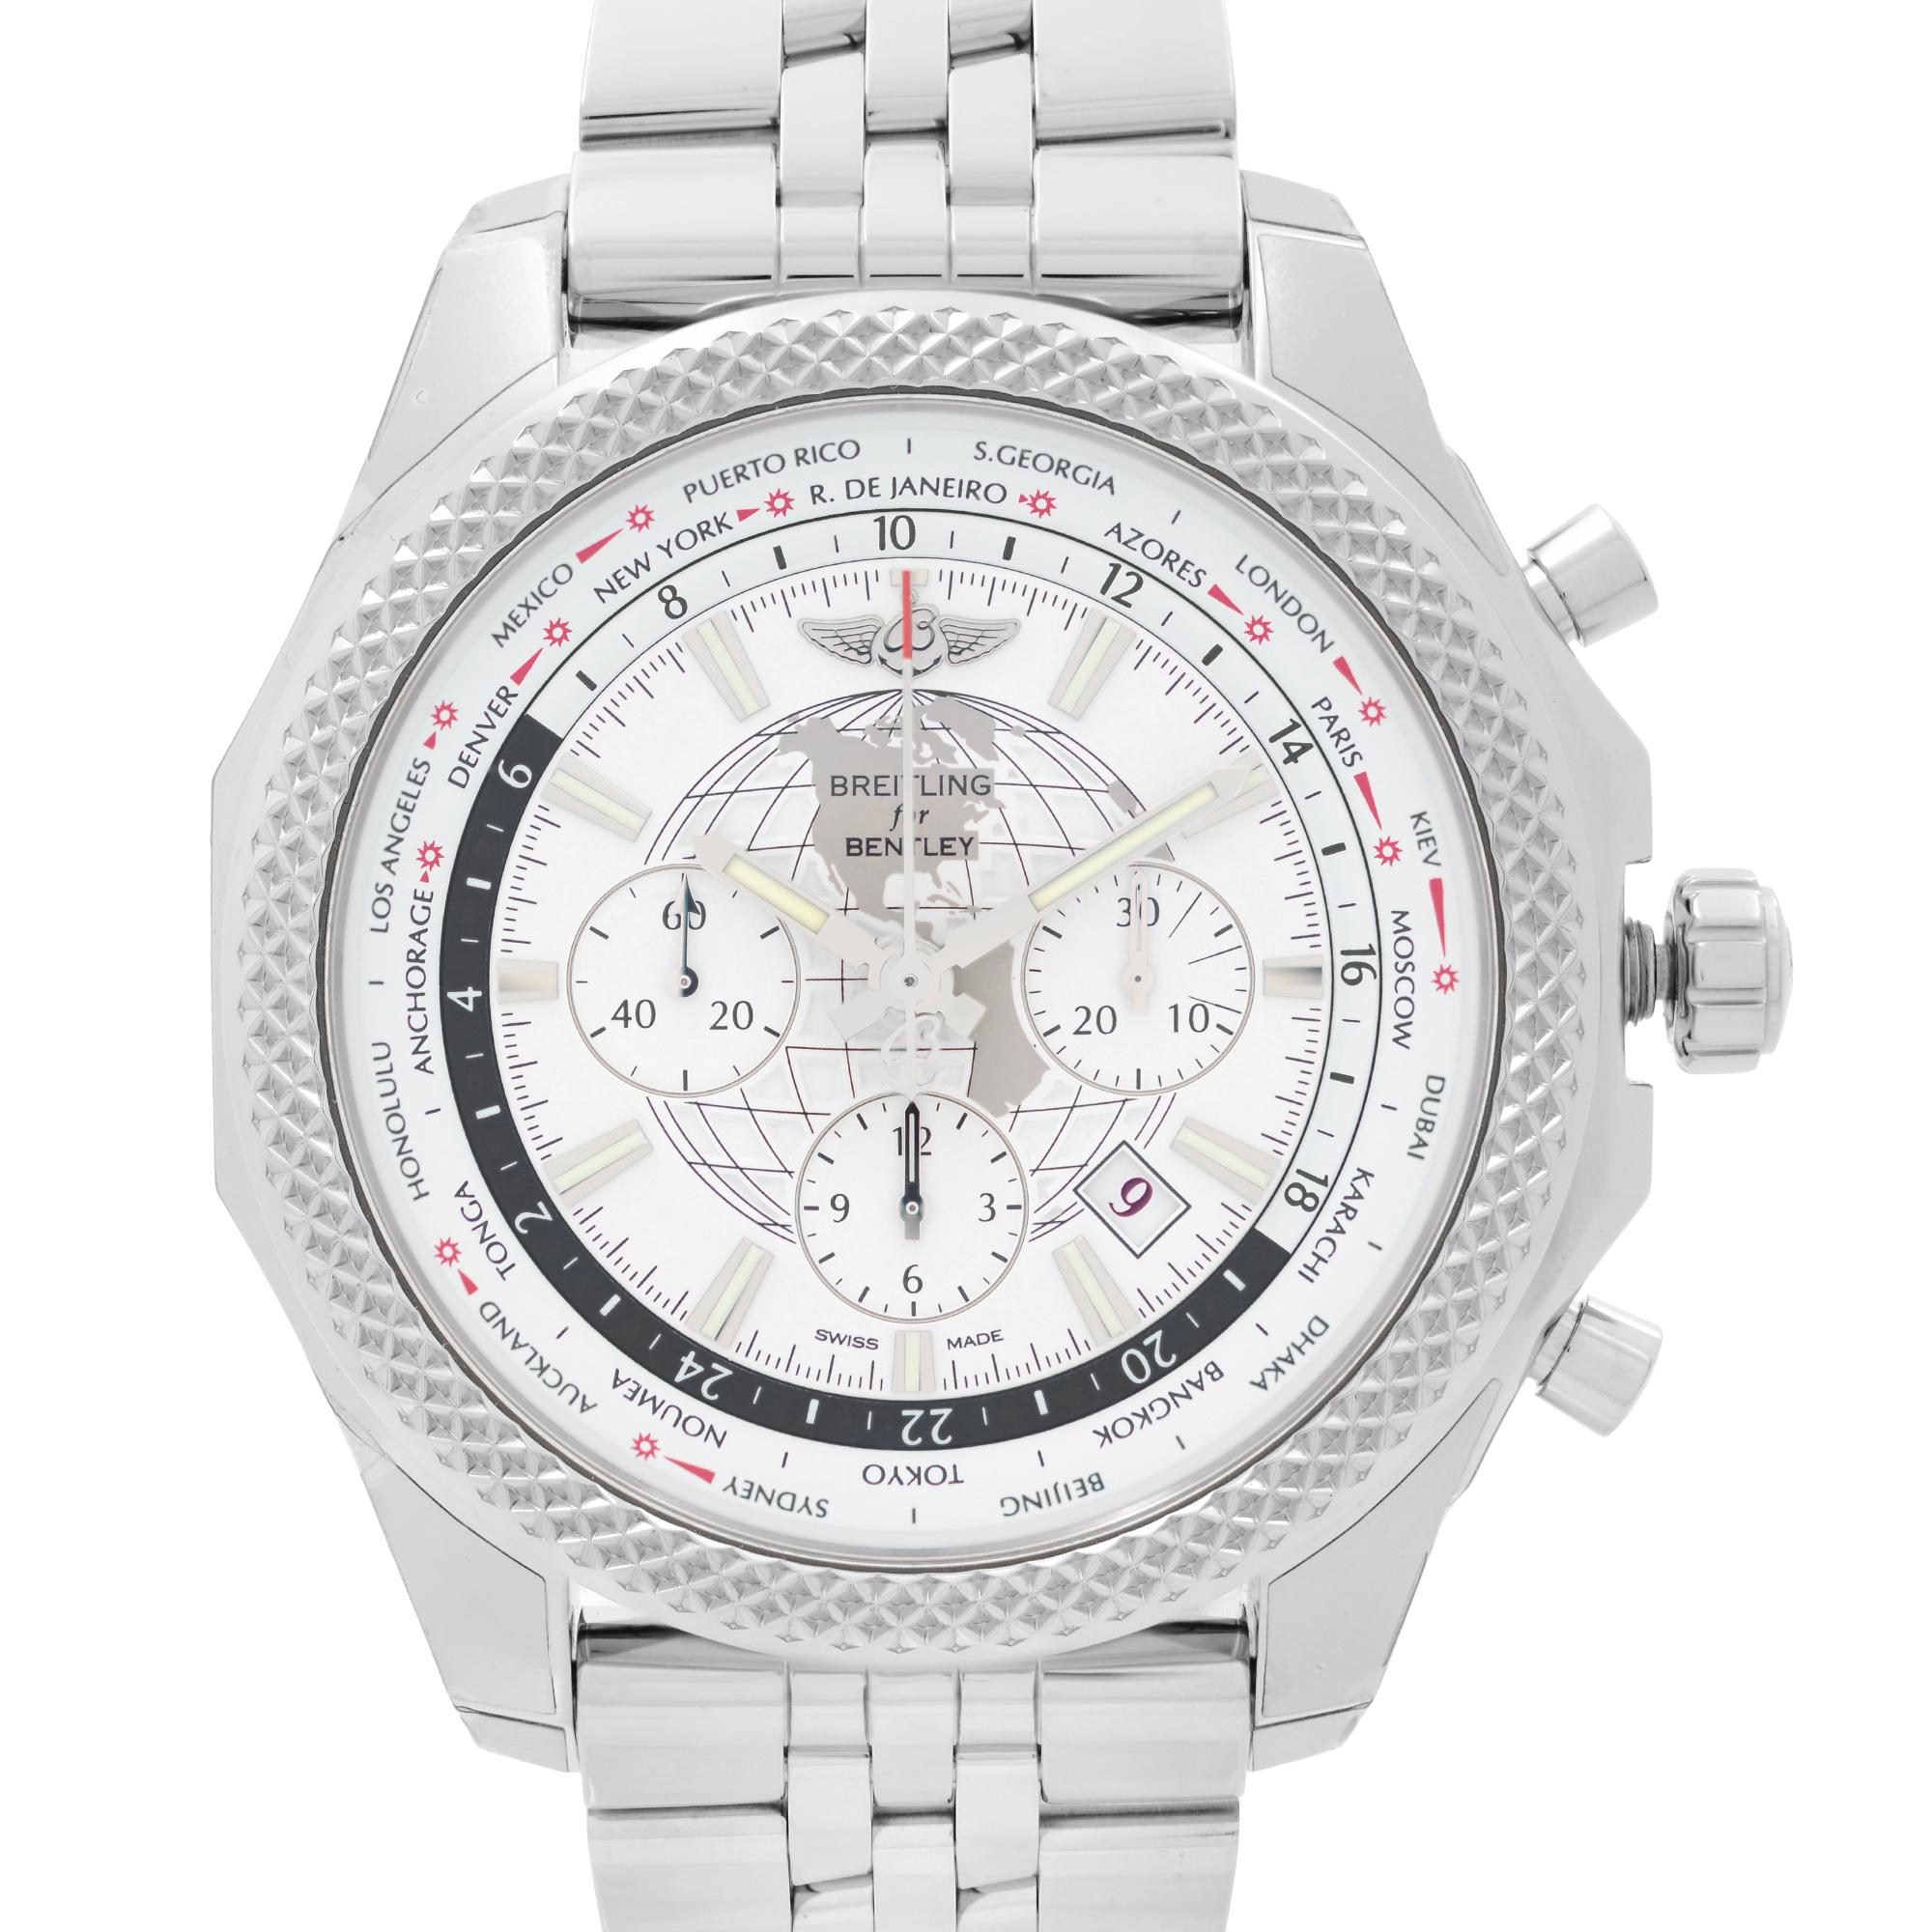 Store Display Model.  Breitling Bentley 05 Unitime White Dial Automatic Men's Watch AB0521U0/A768-990A. Stickers on the case. This Beautiful Timepiece Features: Stainless Steel Case and Bracelet, Fixed Stainless Steel Bezel, Artica White Dial with